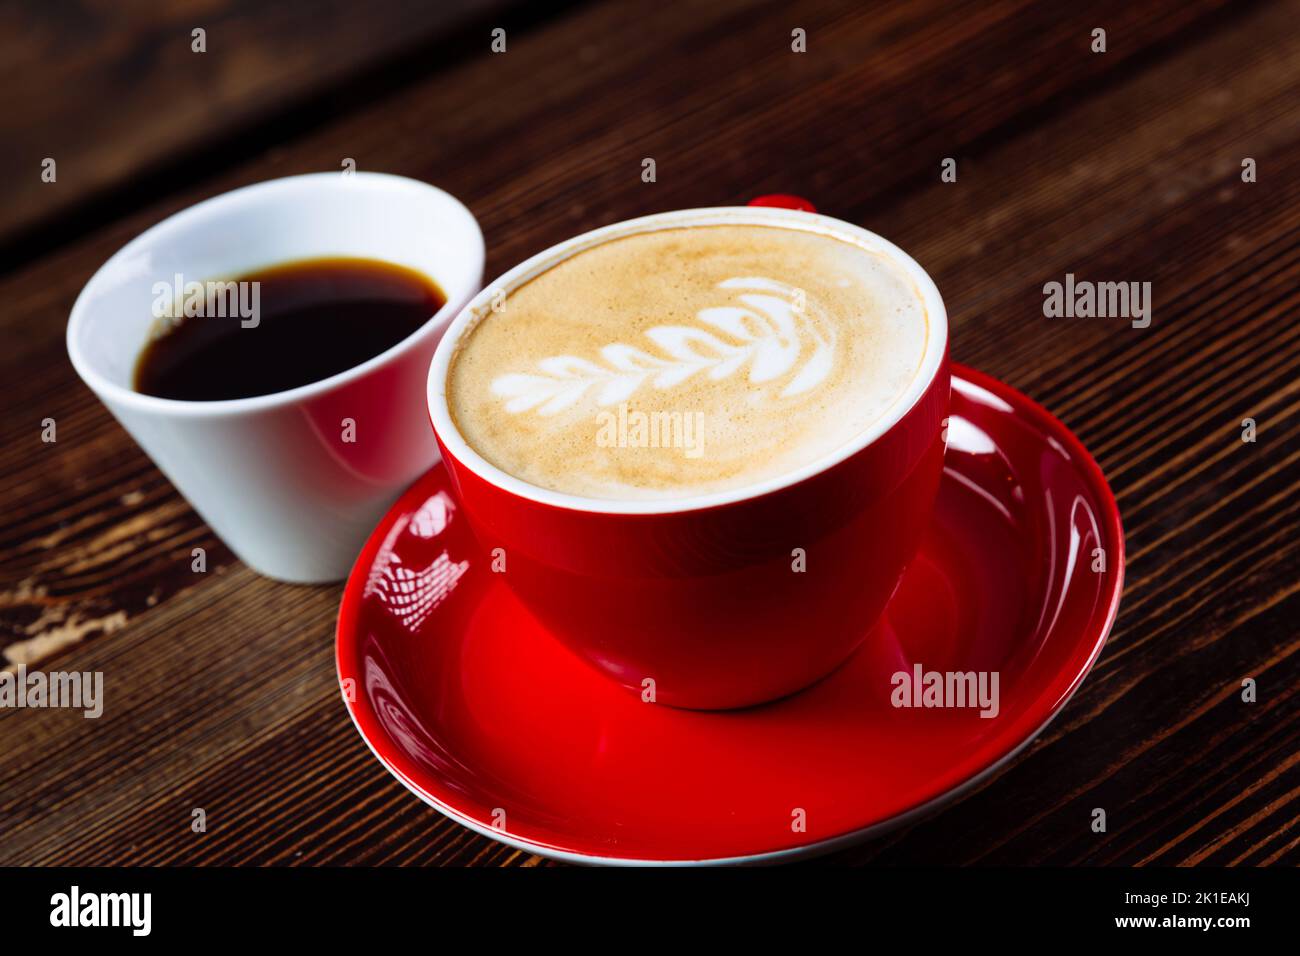 Aromatic coffee in a red cup with milk foam and latte art and freshly brewed coffee in a white cup on a light wooden table. Close up Stock Photo